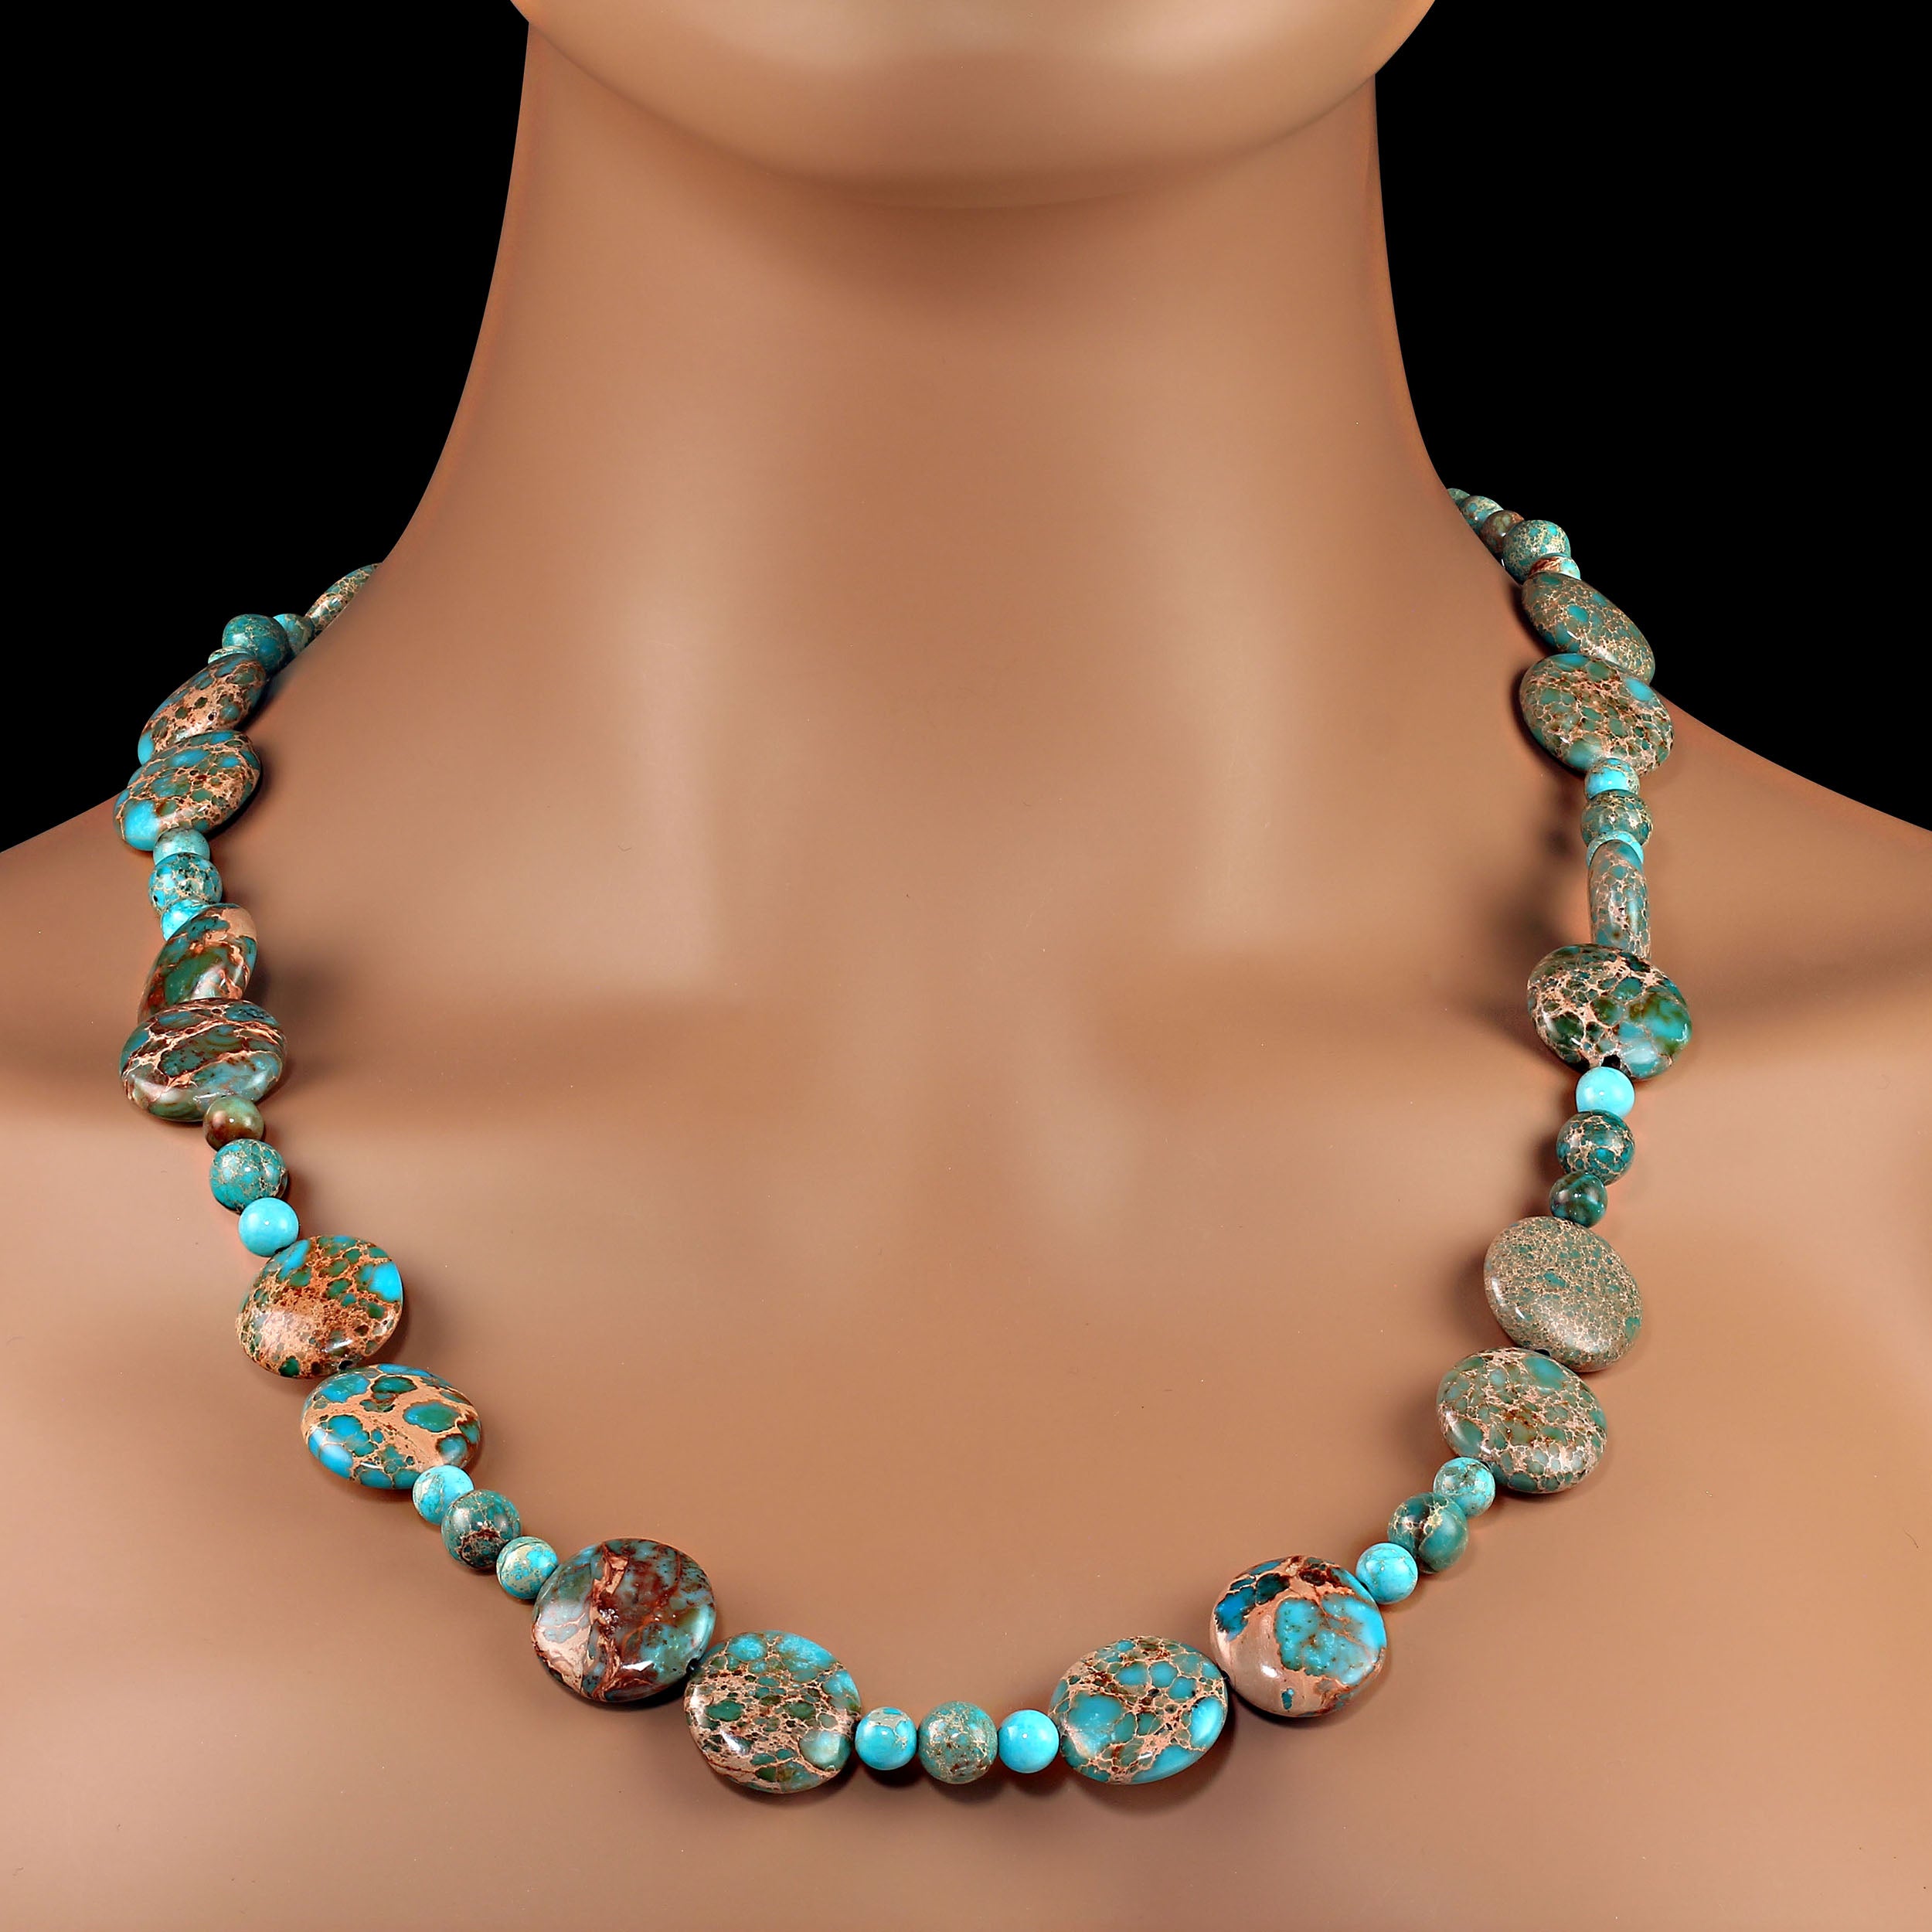 24 Inch Desert Jasper necklace in several sizes to accentuate to color and design of the matrix in the 13MM round flat tabs, as well as the round 8 and 6MM smooth beads.  These turquoise colors with browns and tans are a delight to look at.  The